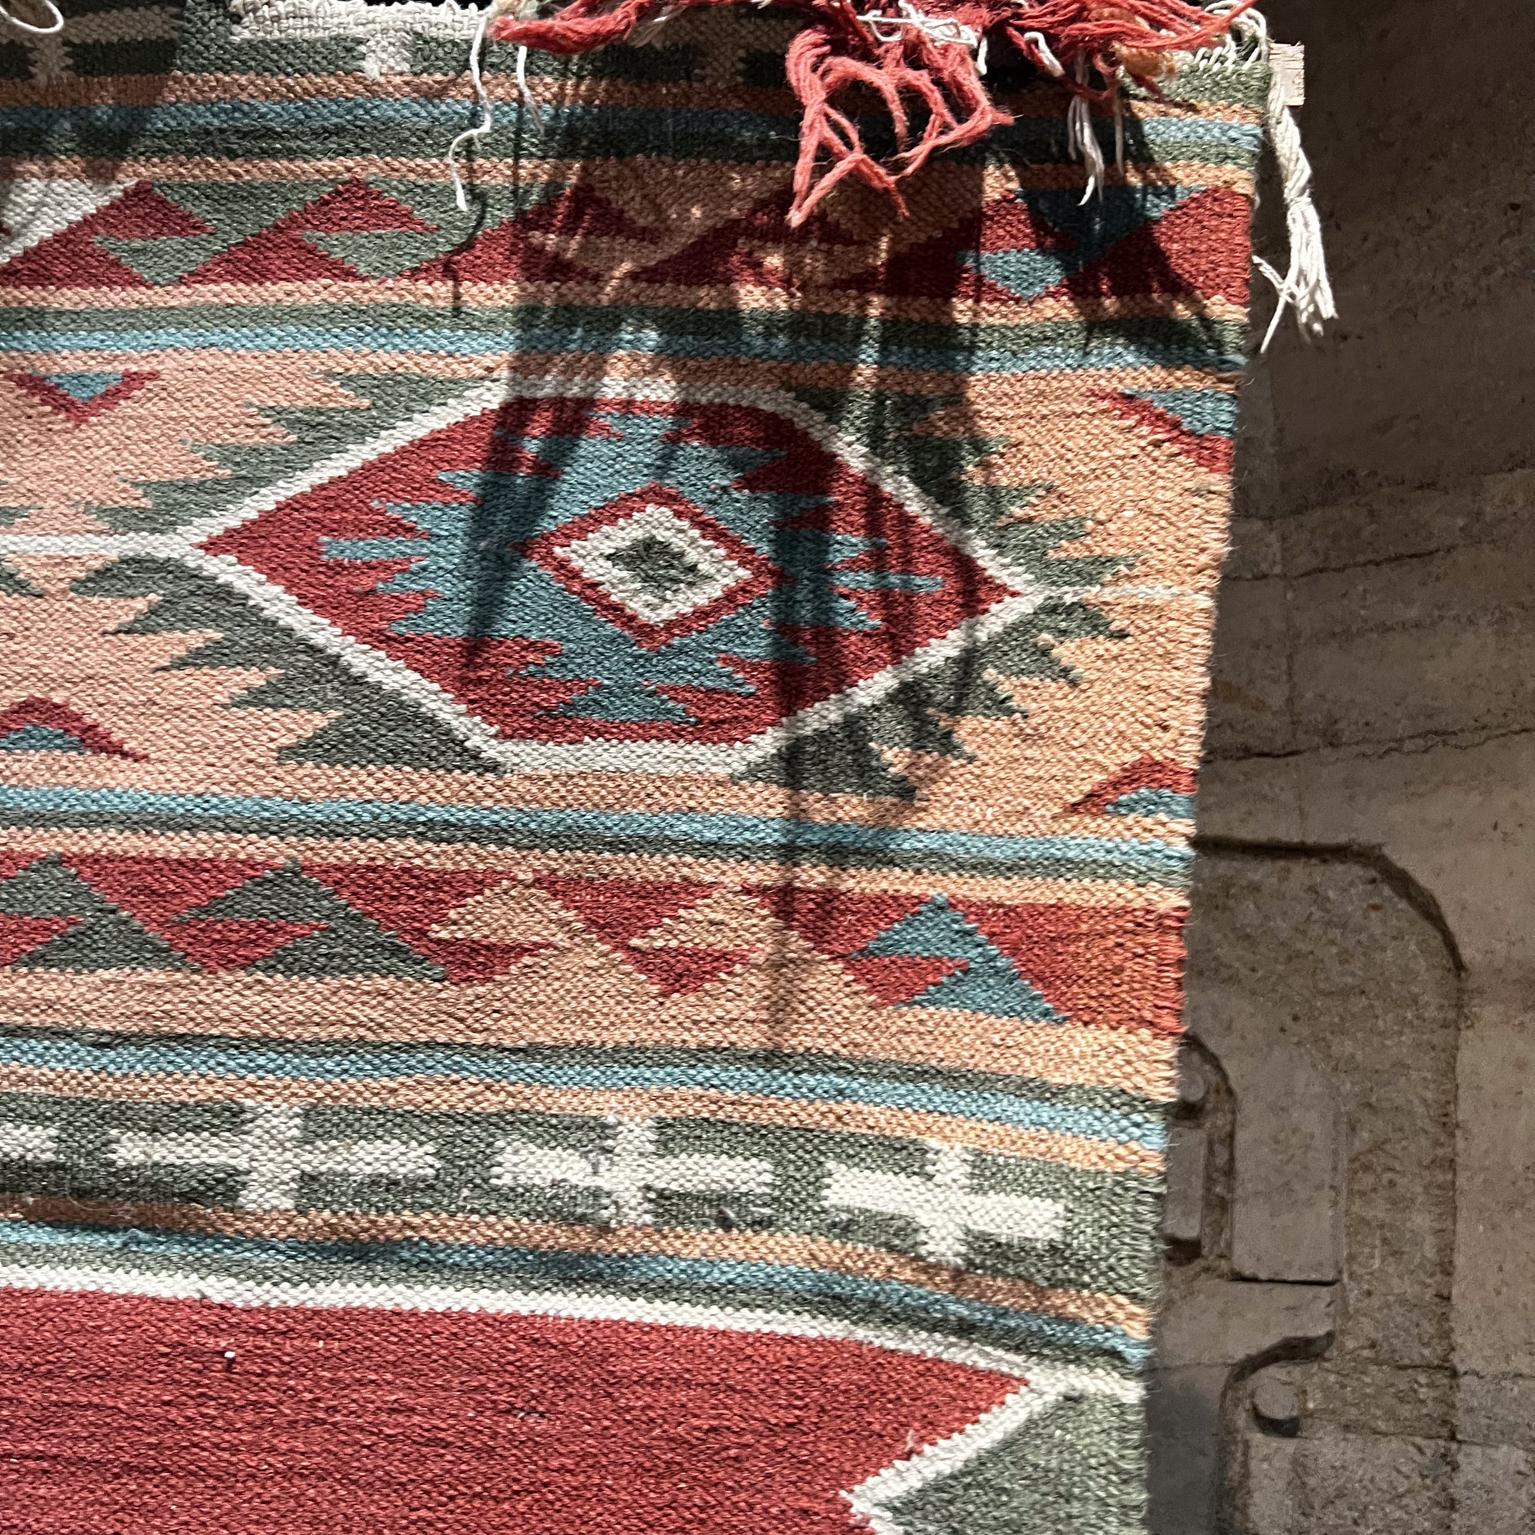 1980s Zapotec Mexican Wall Art Tapestry Mexico
64 x 42
Original vintage condition unrestored
See all images provided.